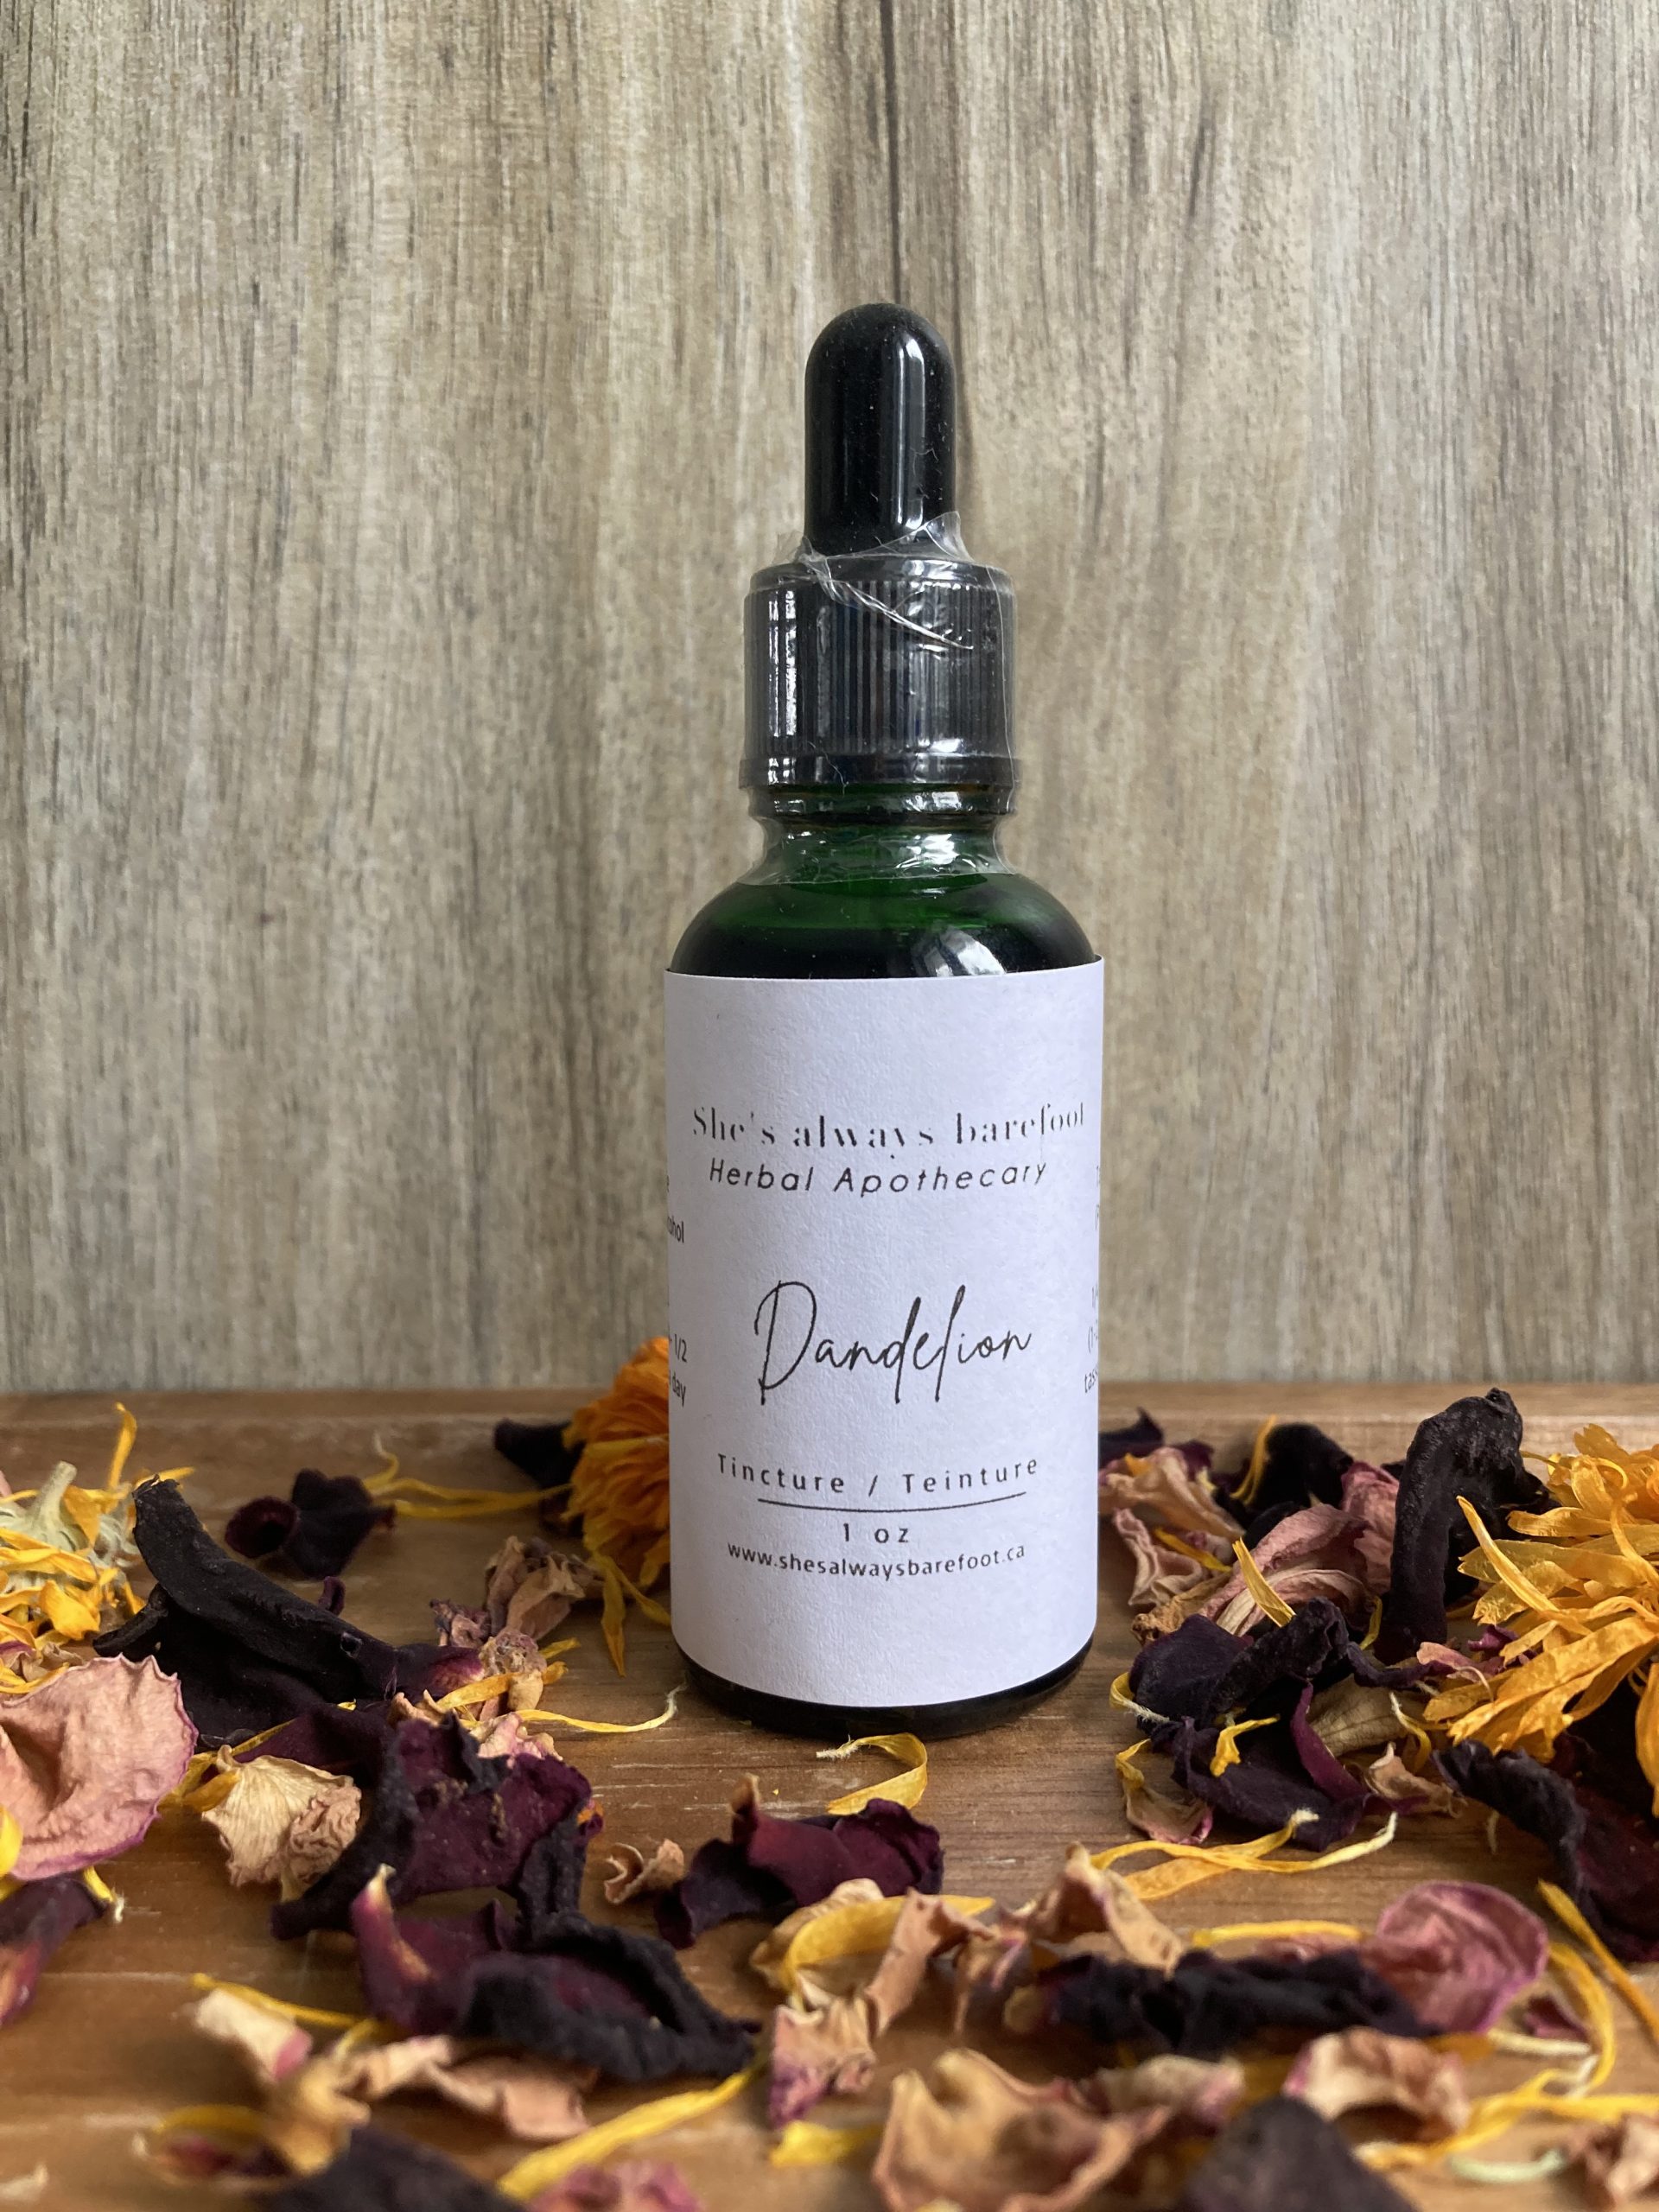 Dandelion Root tincture SOLD OUT